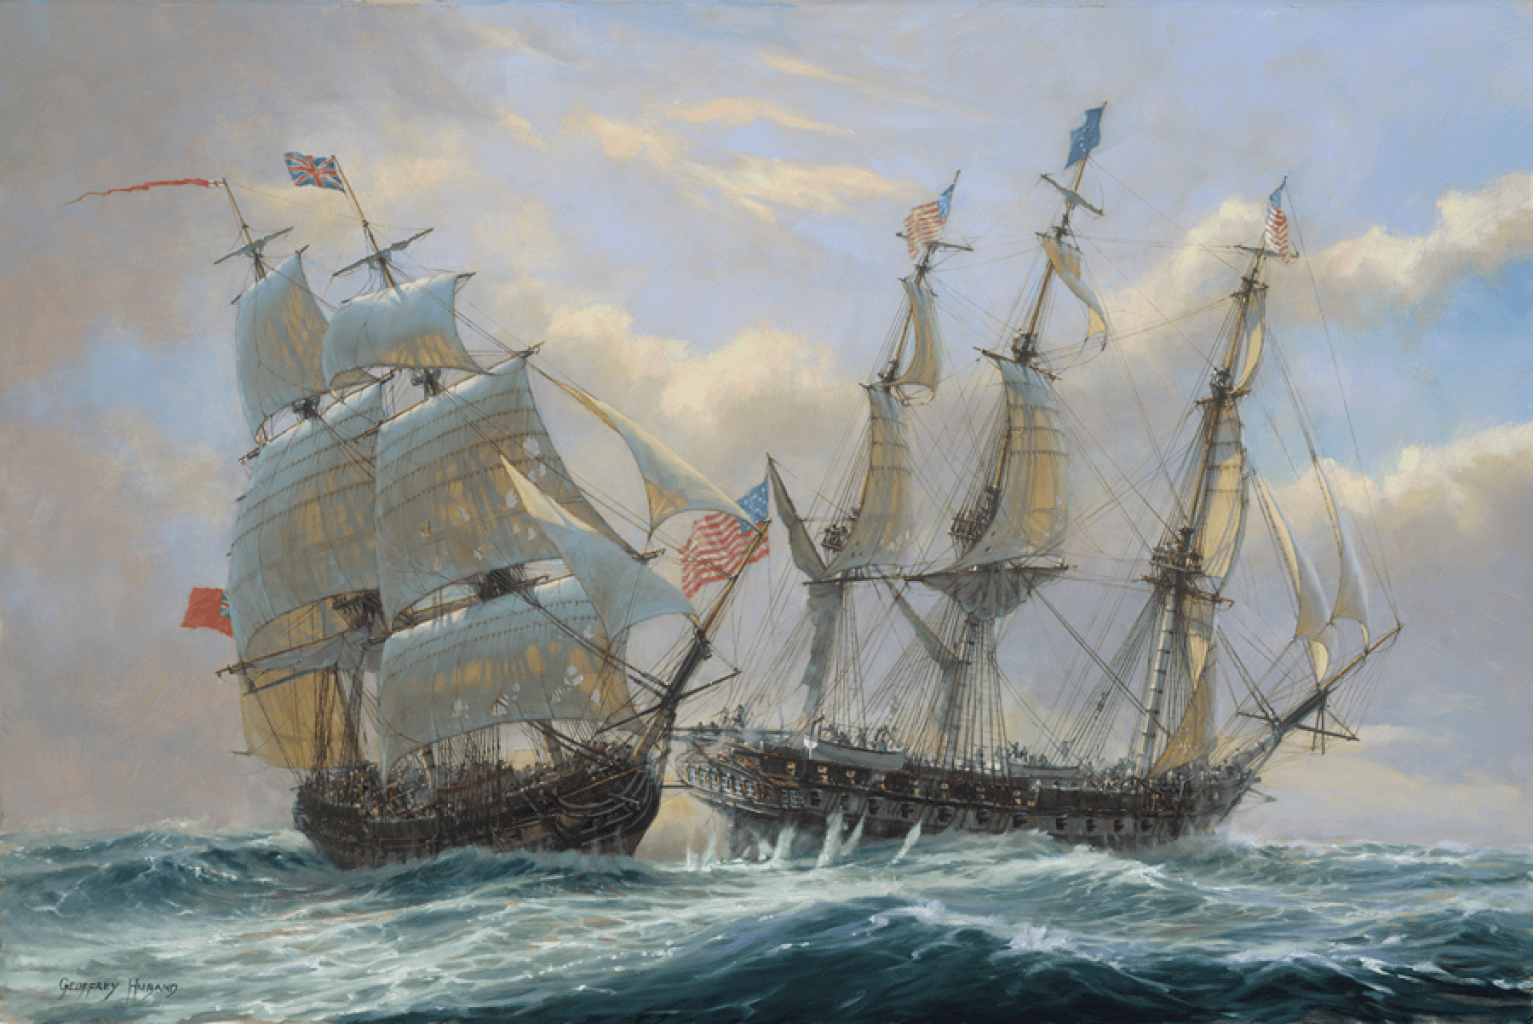 Uss Constitution Painting. Explore collection